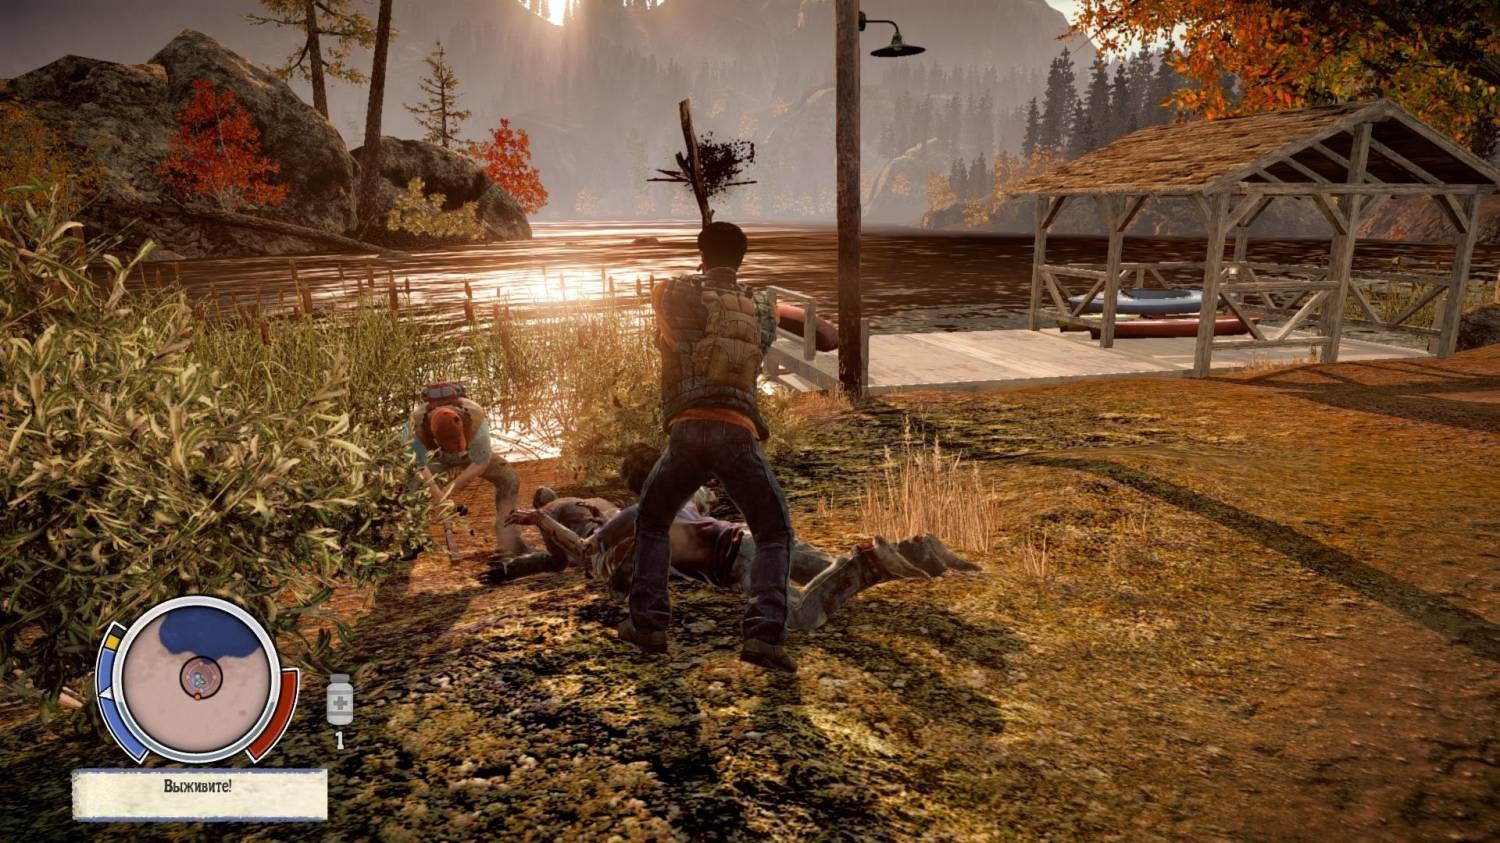 State of decay требования. State of Decay 1. State of Decay 2 системные требования. State of Decay 3. State of Decay 1 системные требования.